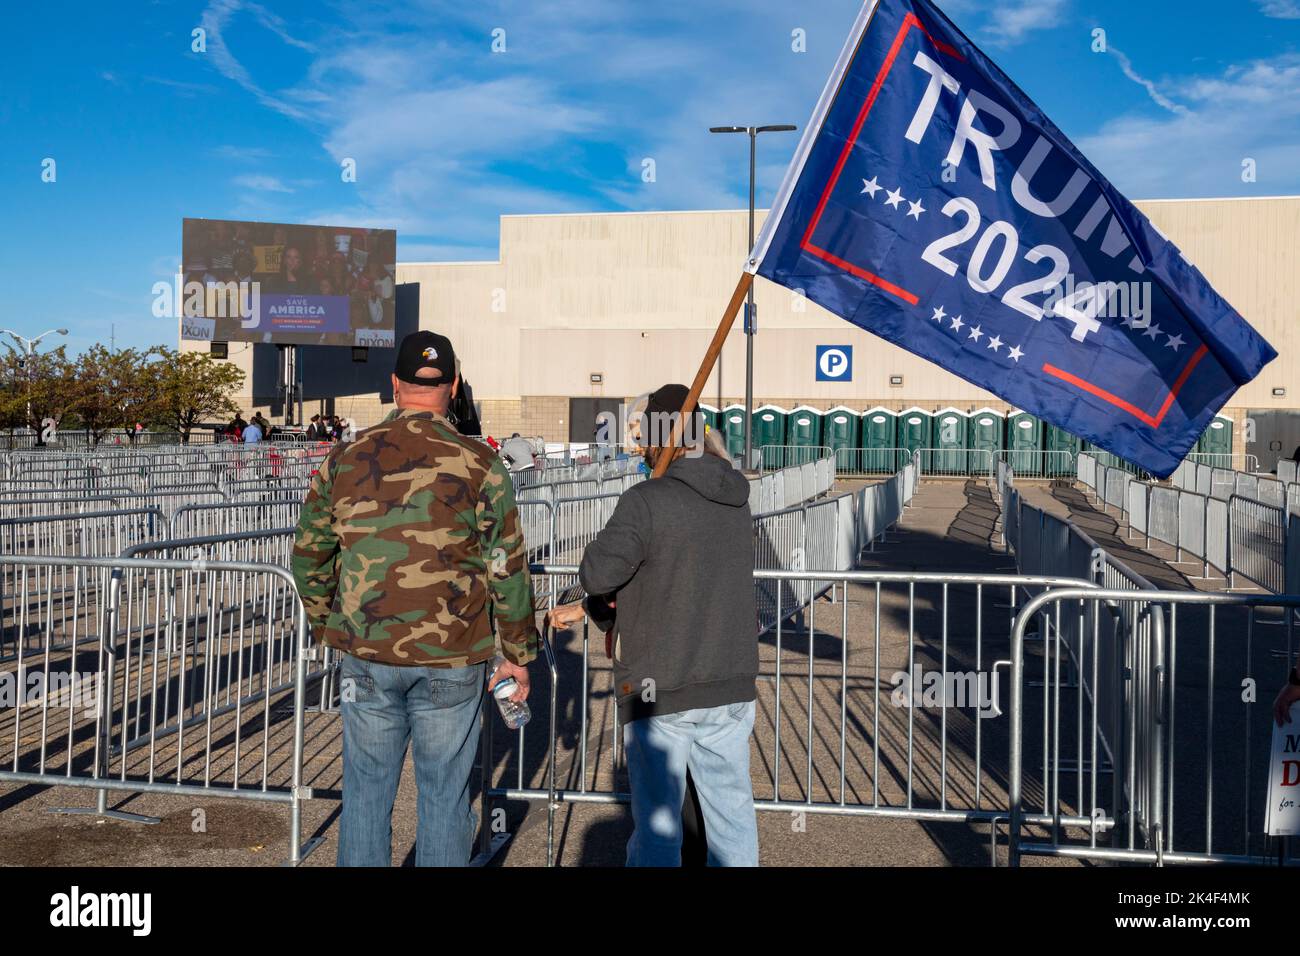 Warren, Michigan, USA. 1st Oct, 2022. Two Donald Trump supporters outside a rally where the former president campaigned for the candidates he has endorsed in the 2022 Michigan general election. He is supporting Tudor Dixon, who is shown speaking at the rally on the screen at left, for Michigan governor. Credit: Jim West/Alamy Live News Stock Photo